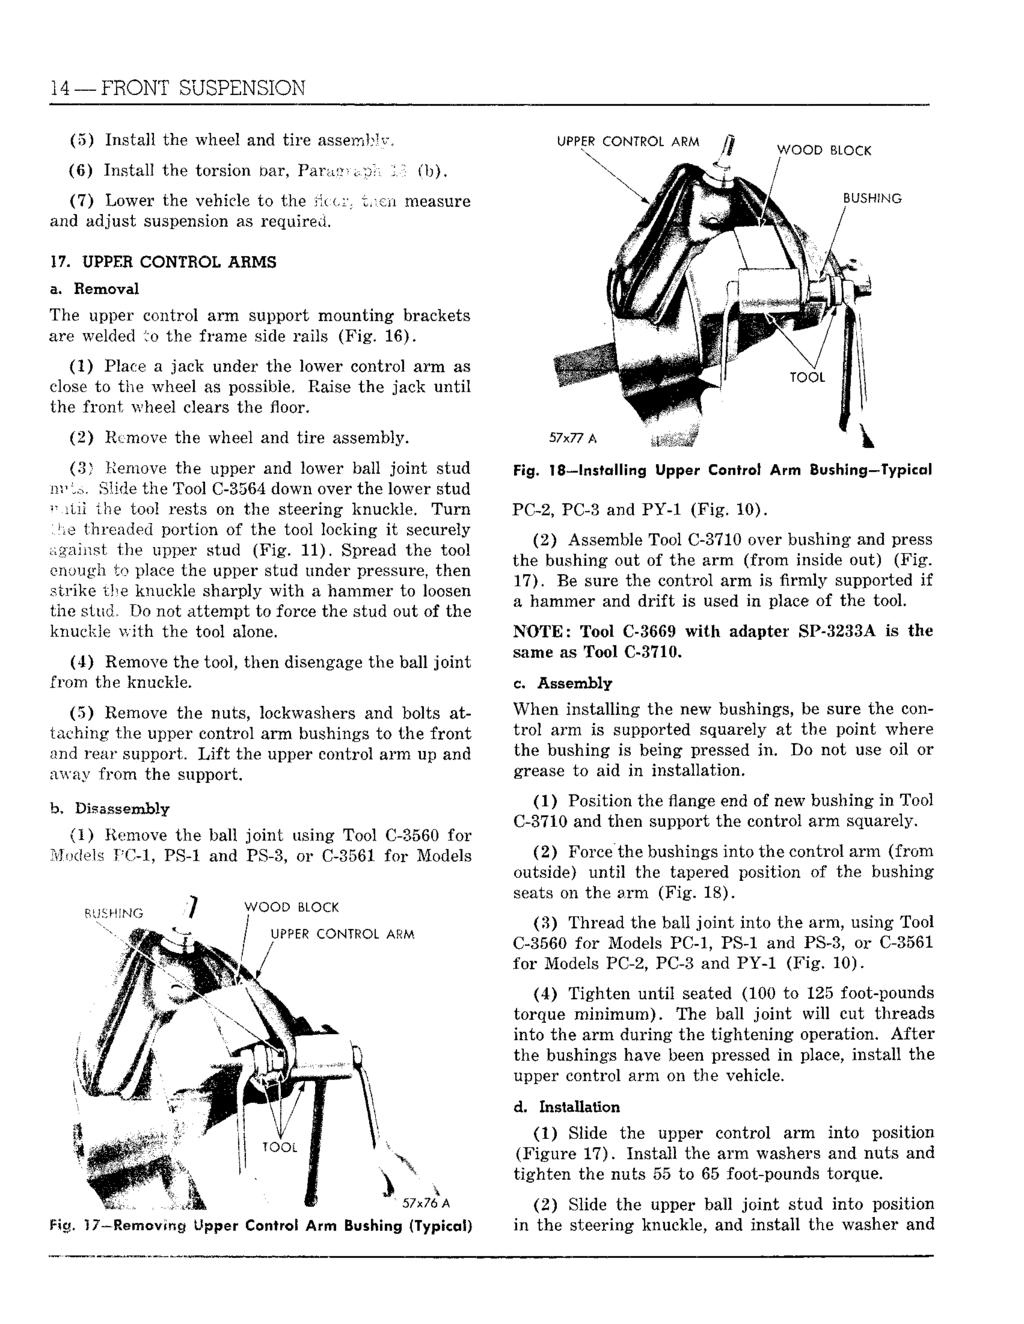 14 FRONT SUSPENSION (5) Install the wheel and tire assembly. (6) Install the torsion bar, Paragraph 13 (b). (7) Lower the vehicle to the floor, then measure and adjust suspension as required. 17.